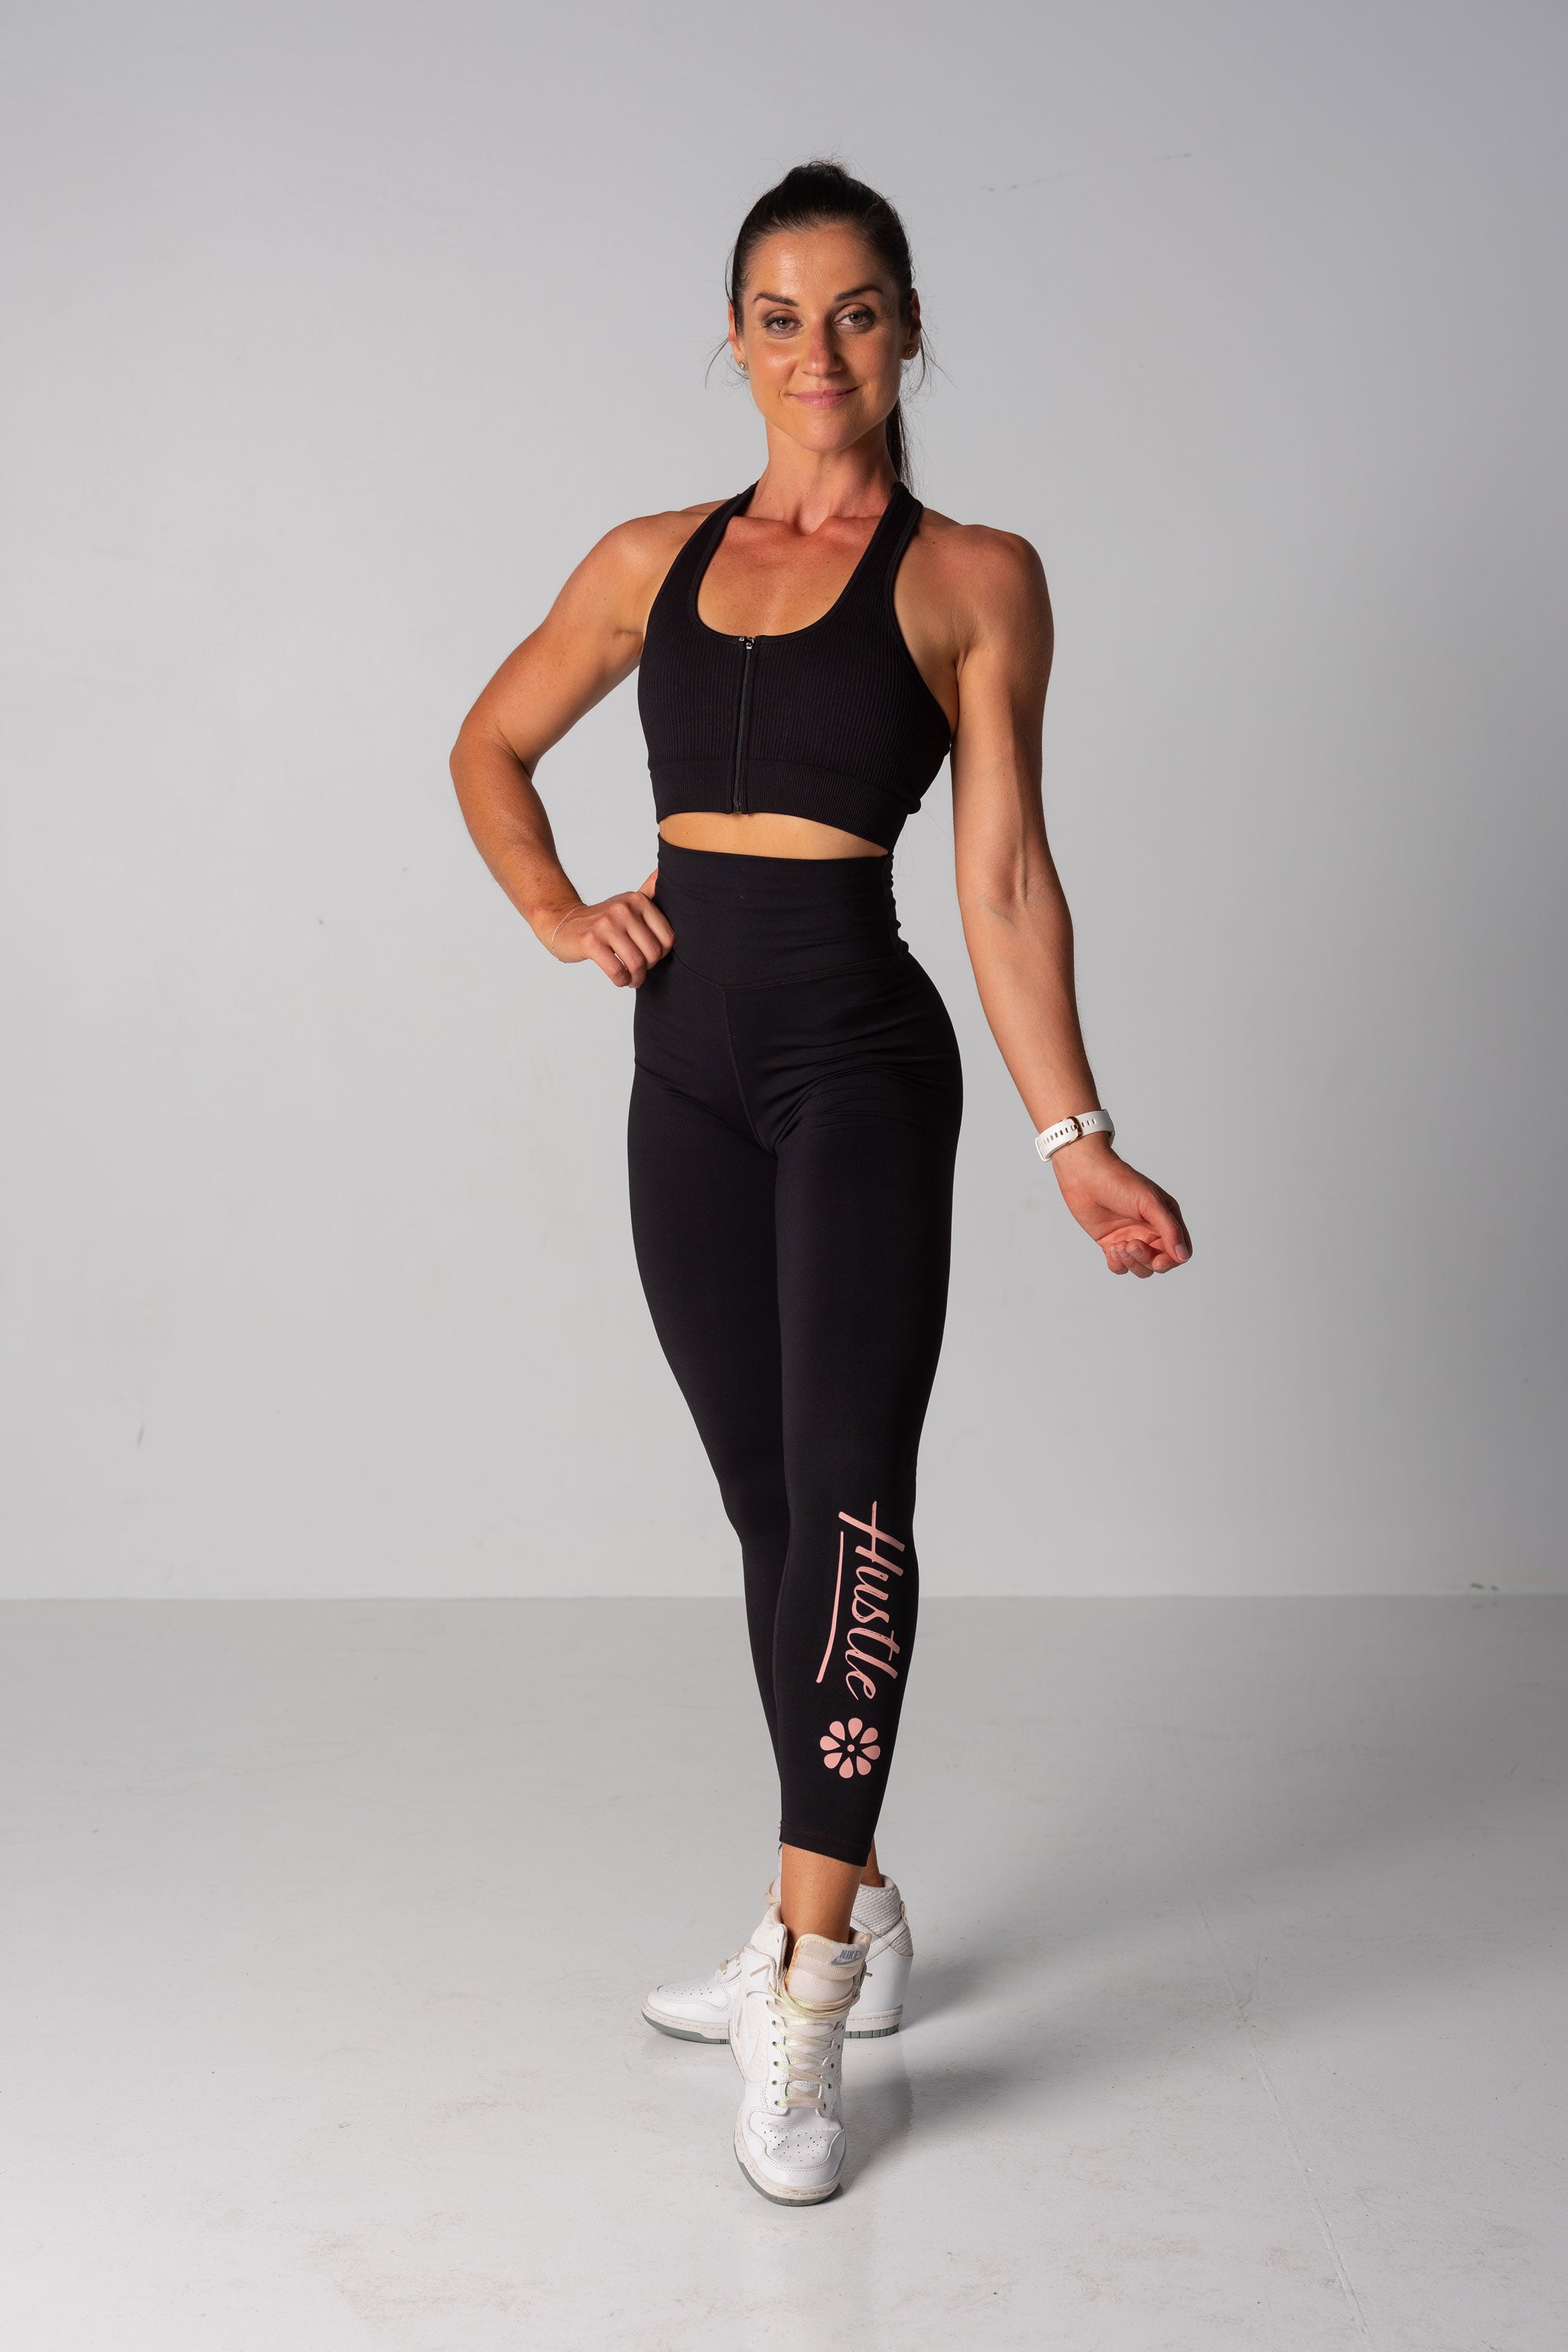 LC Fitness - Gym Wear for Women, Workout Clothes, Women's Activewear